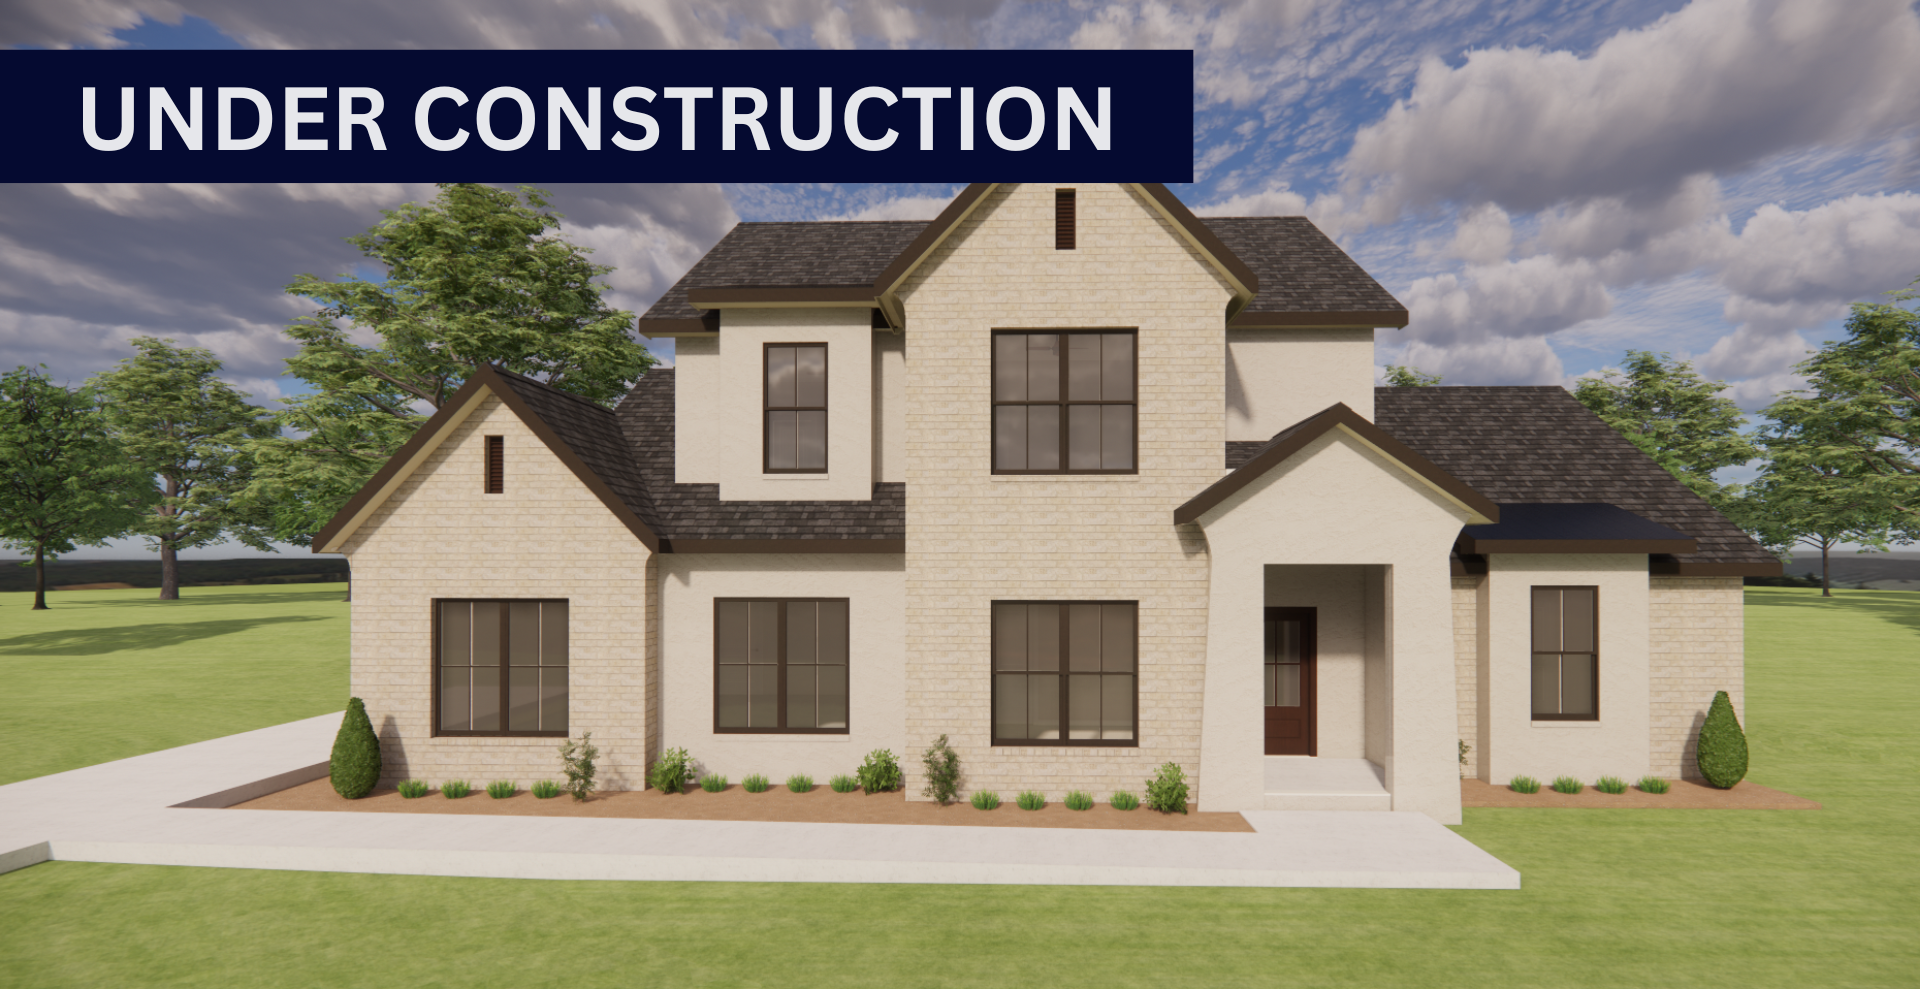 new construction home that is two story and lighter exterior colors. full of windows for natural light